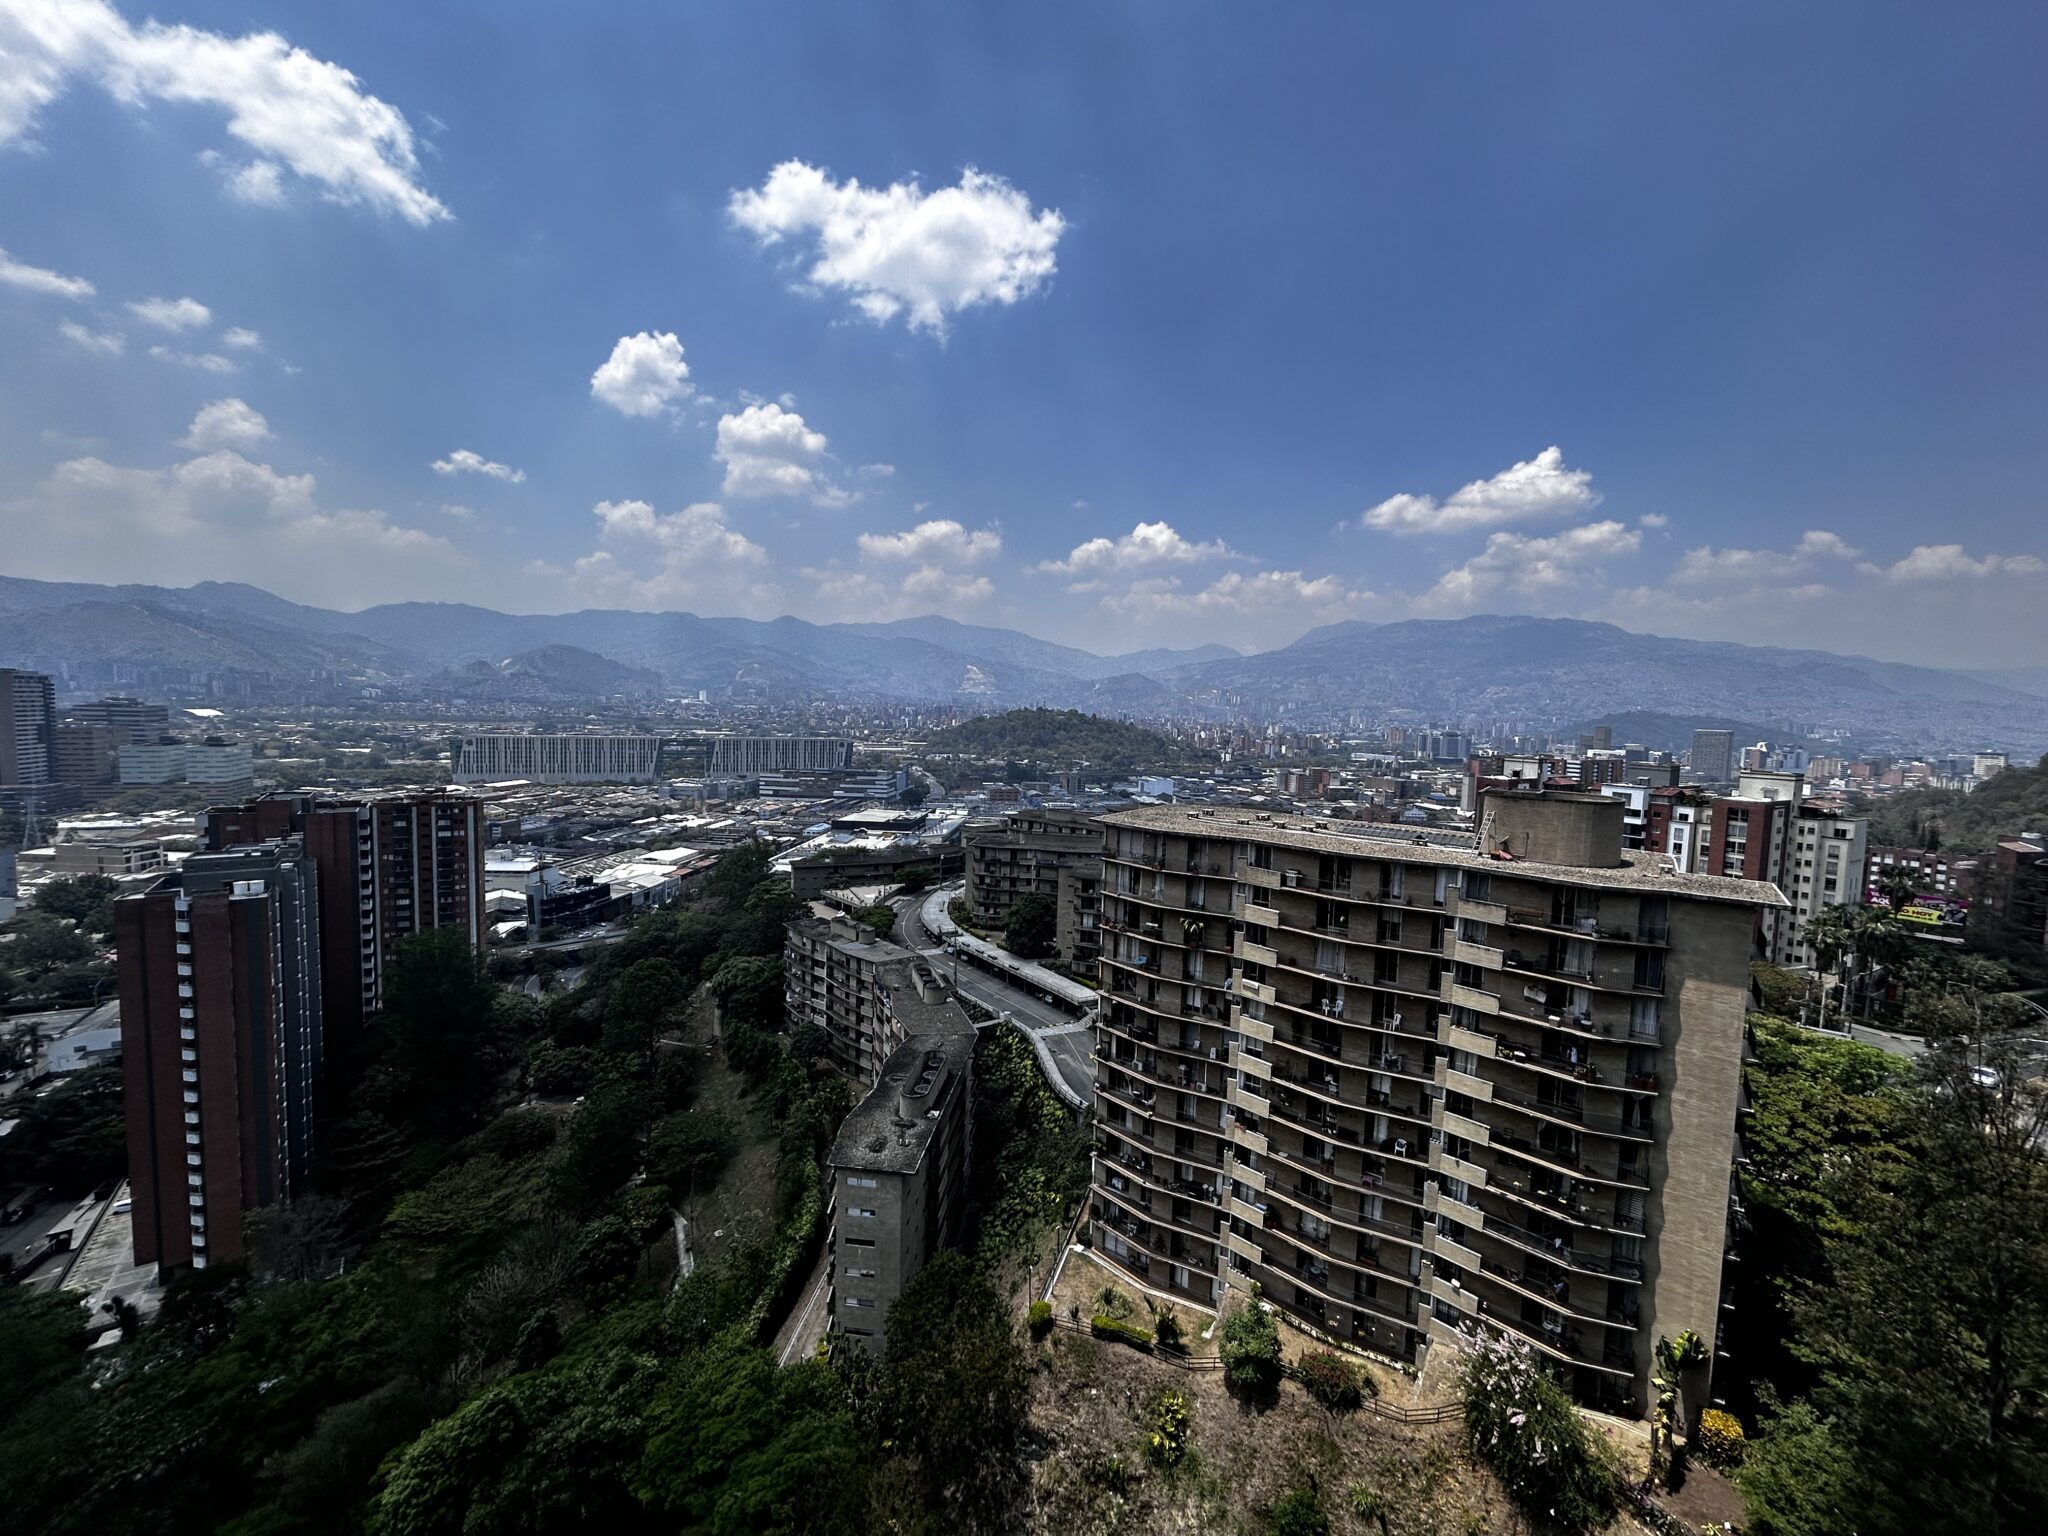 3BR El Poblado Apartment With Stunning Valley Views, Complete Amenities, and Low Taxes